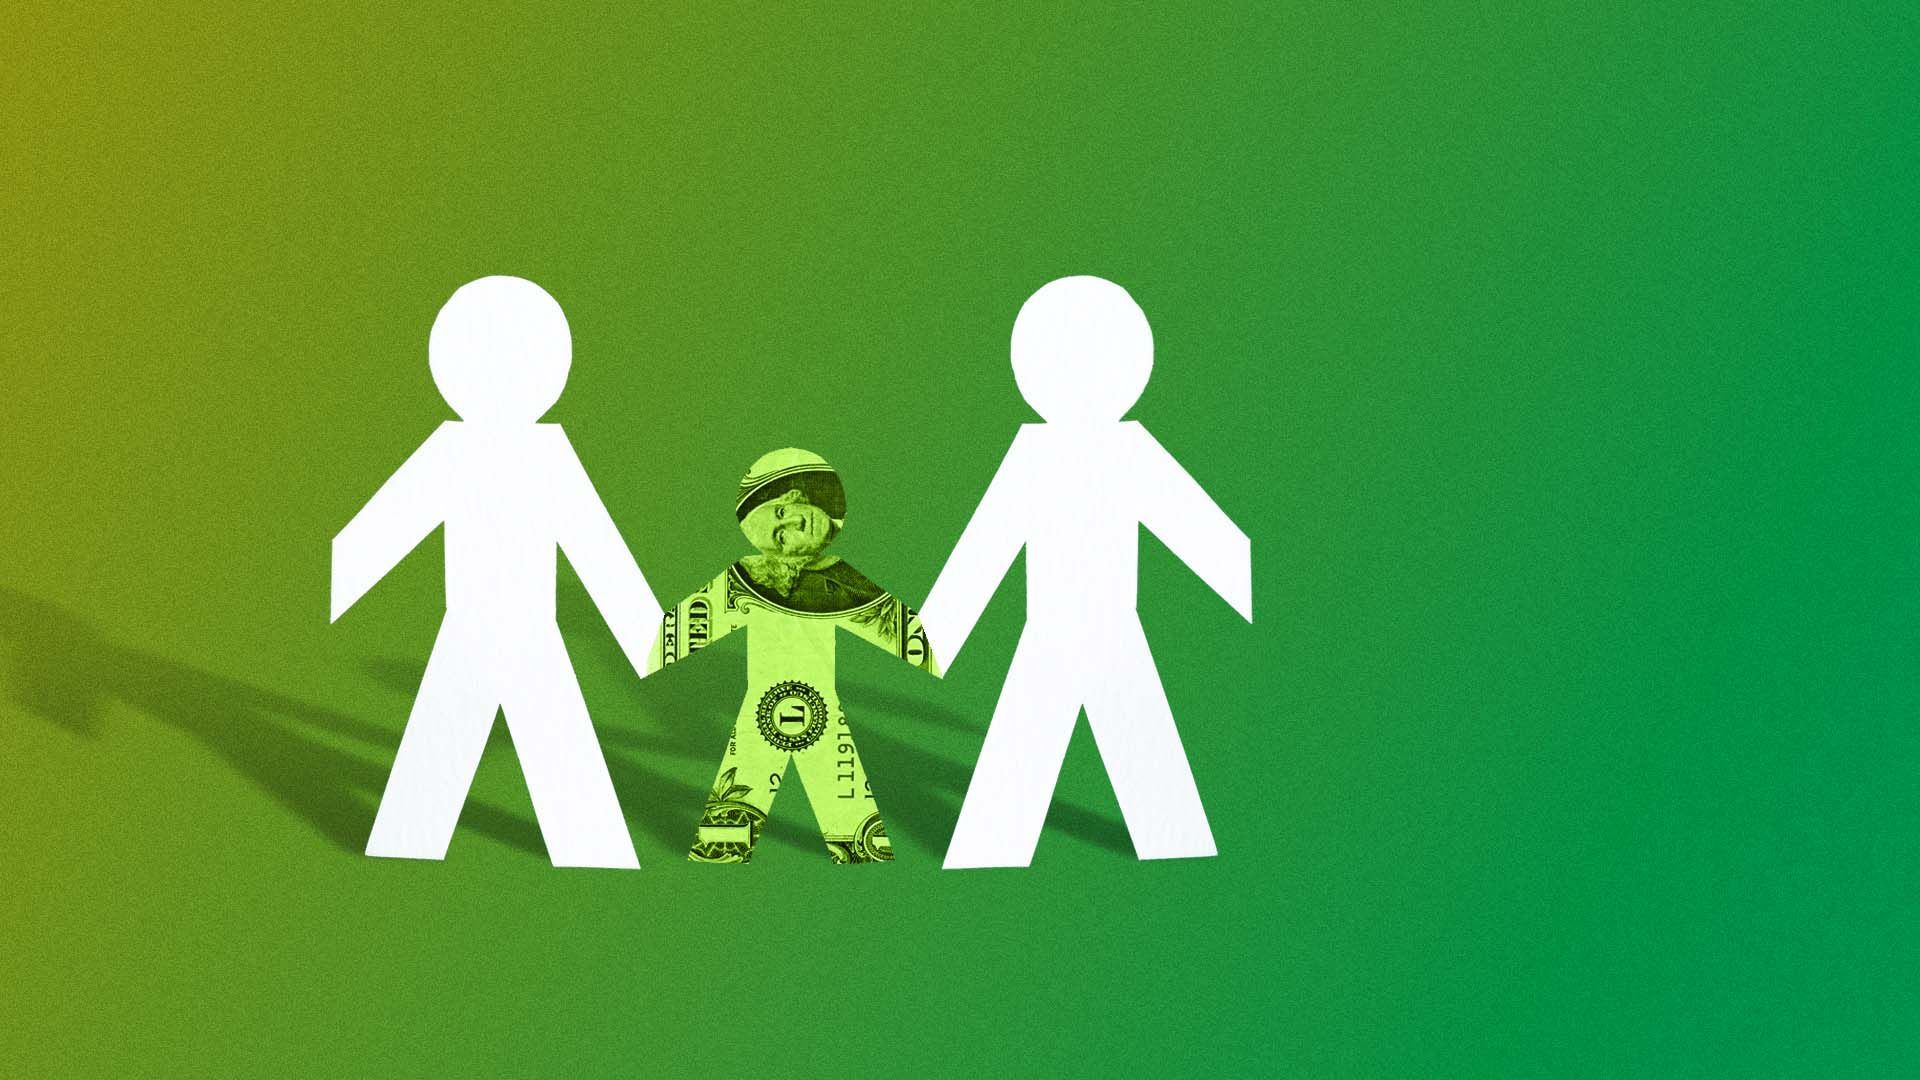 Illustration of a paper cut family, with the child in the middle made of a dollar bill. 